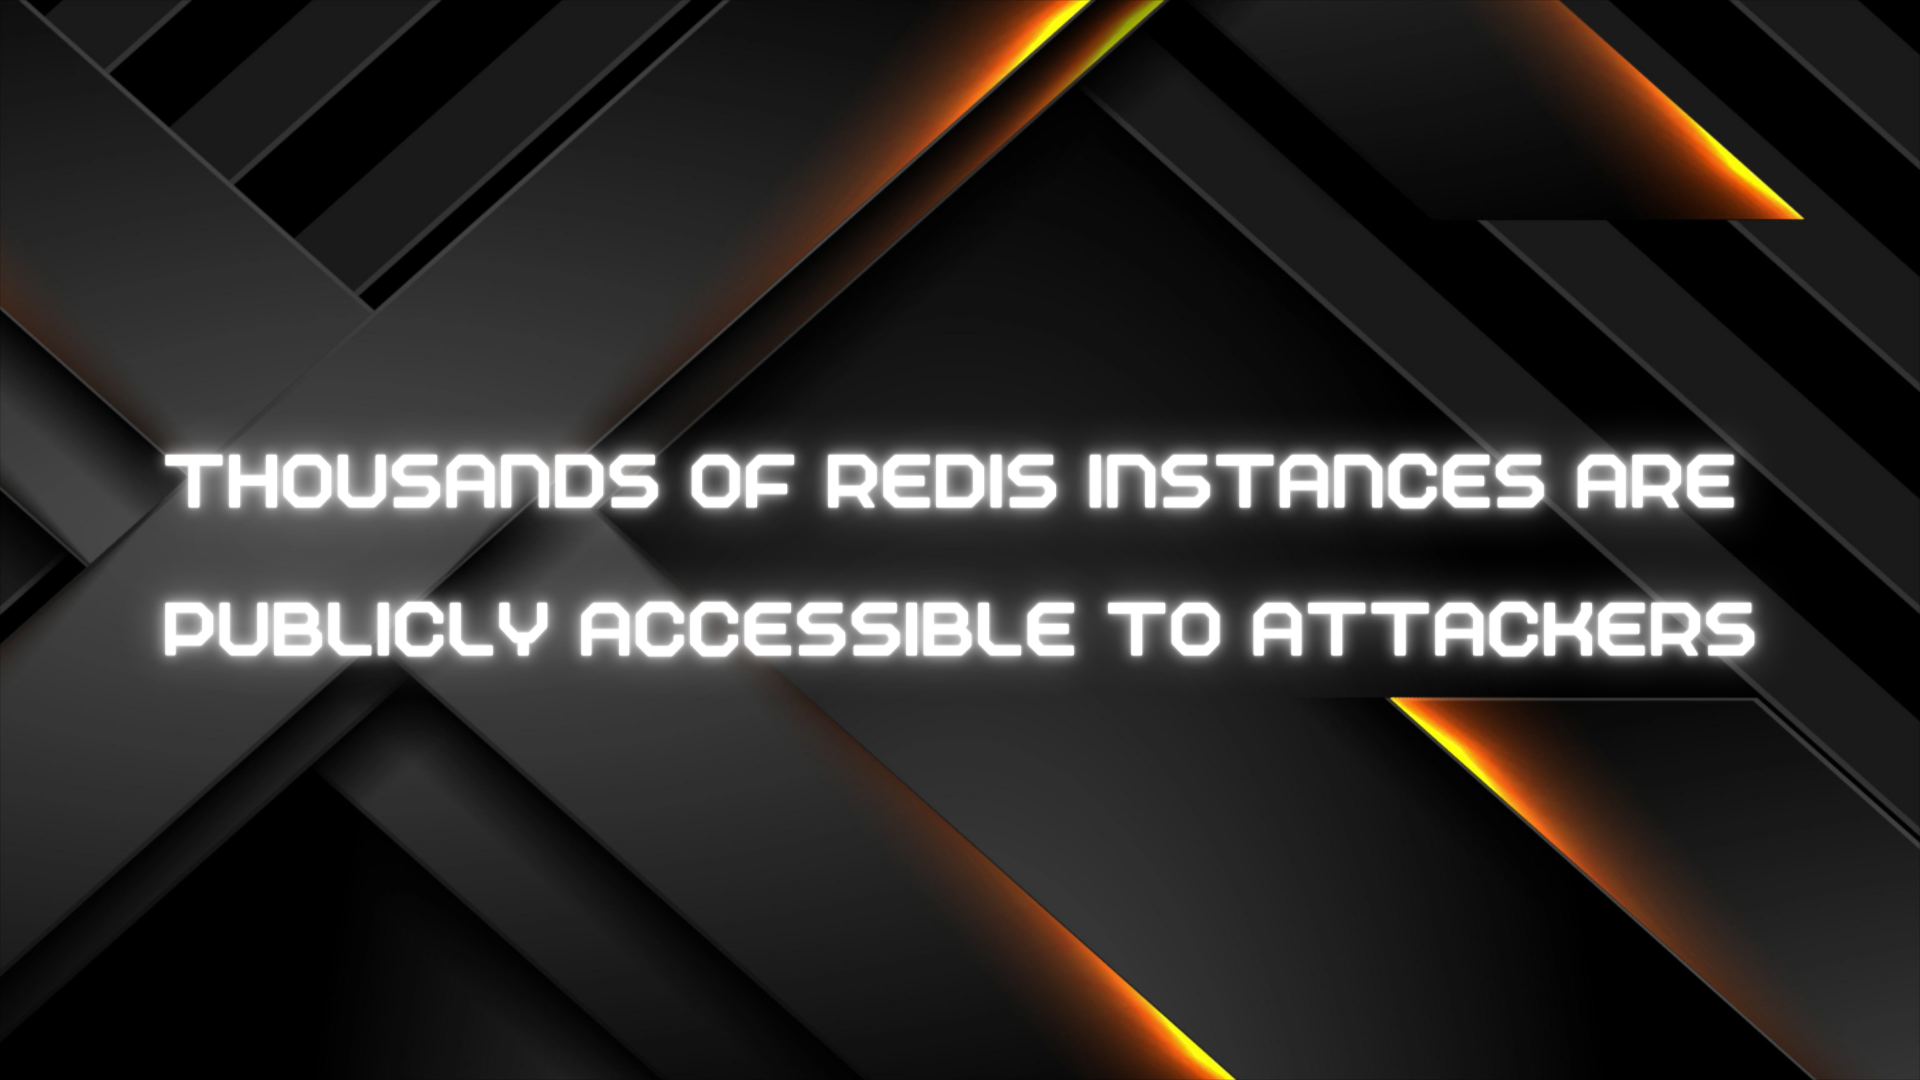 Thousands of Redis Instances Are Publicly Accessible to Attackers